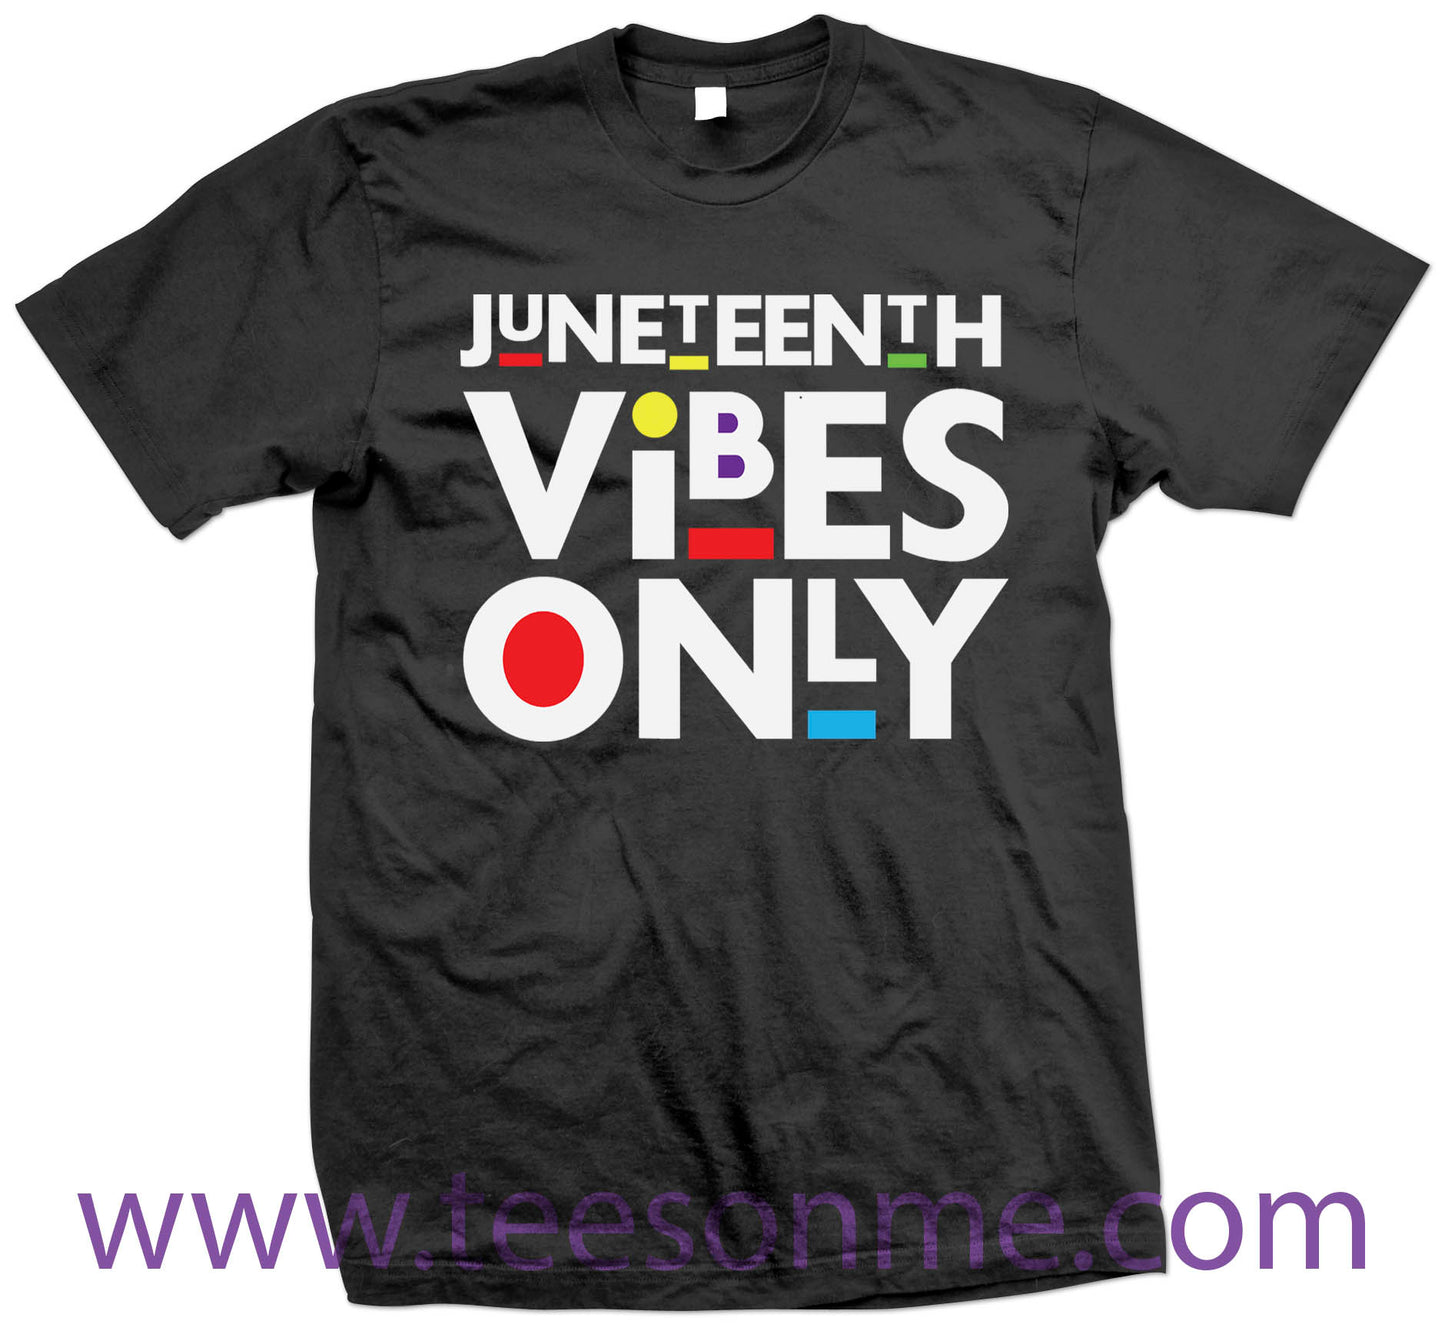 Juneteenth Vibes Only Tshirt - Unisex